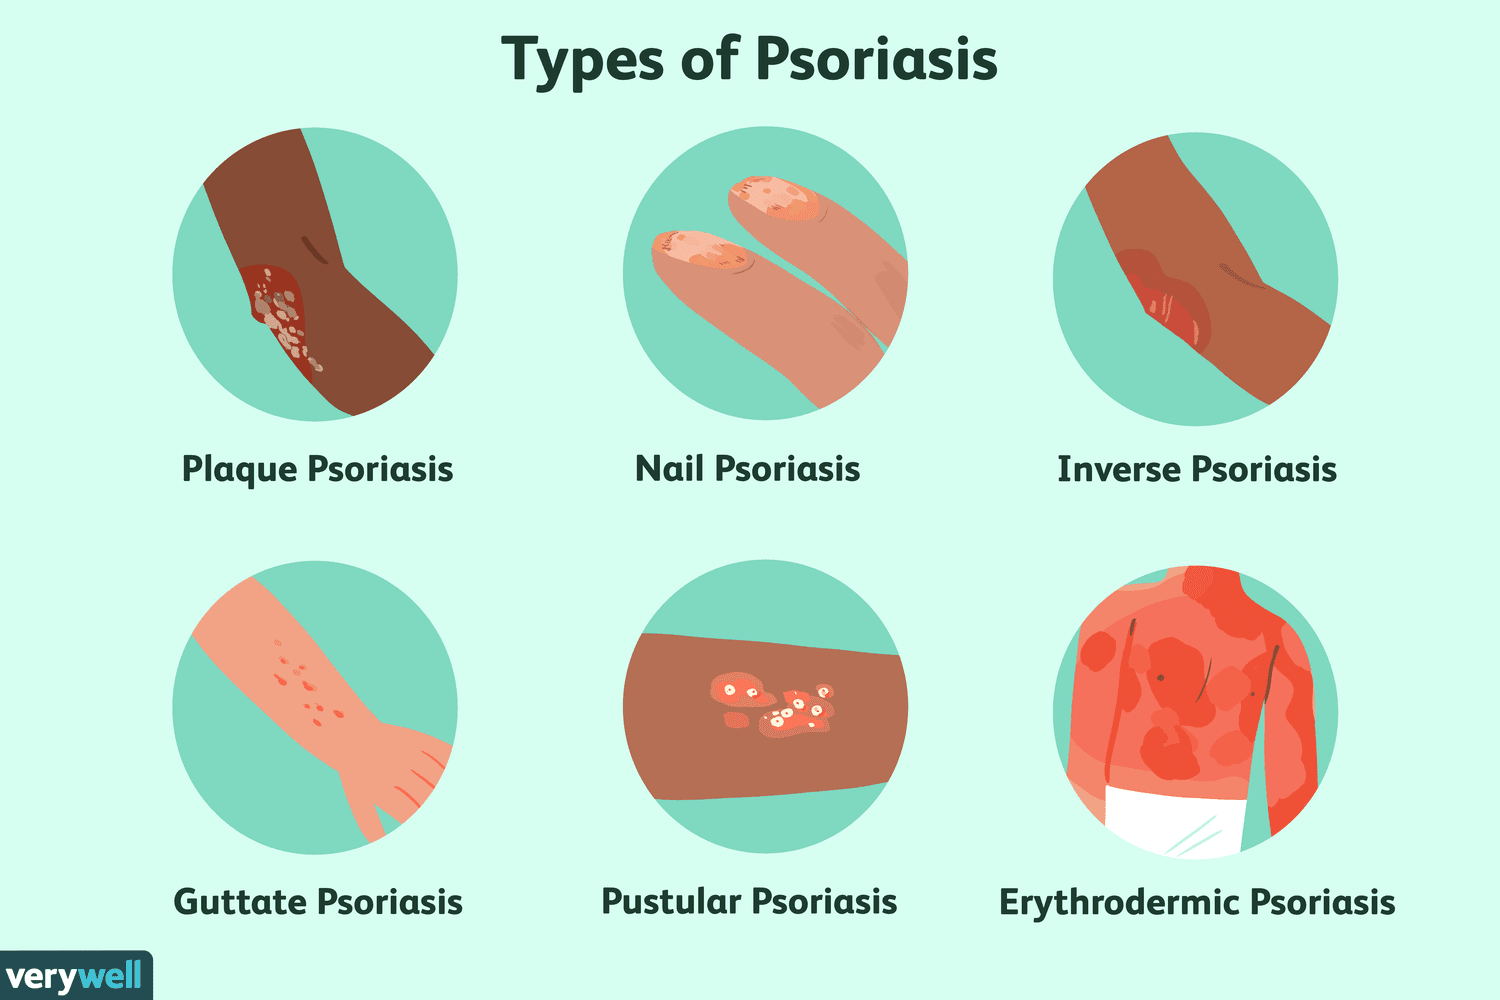 Where does psoriasis affect us?